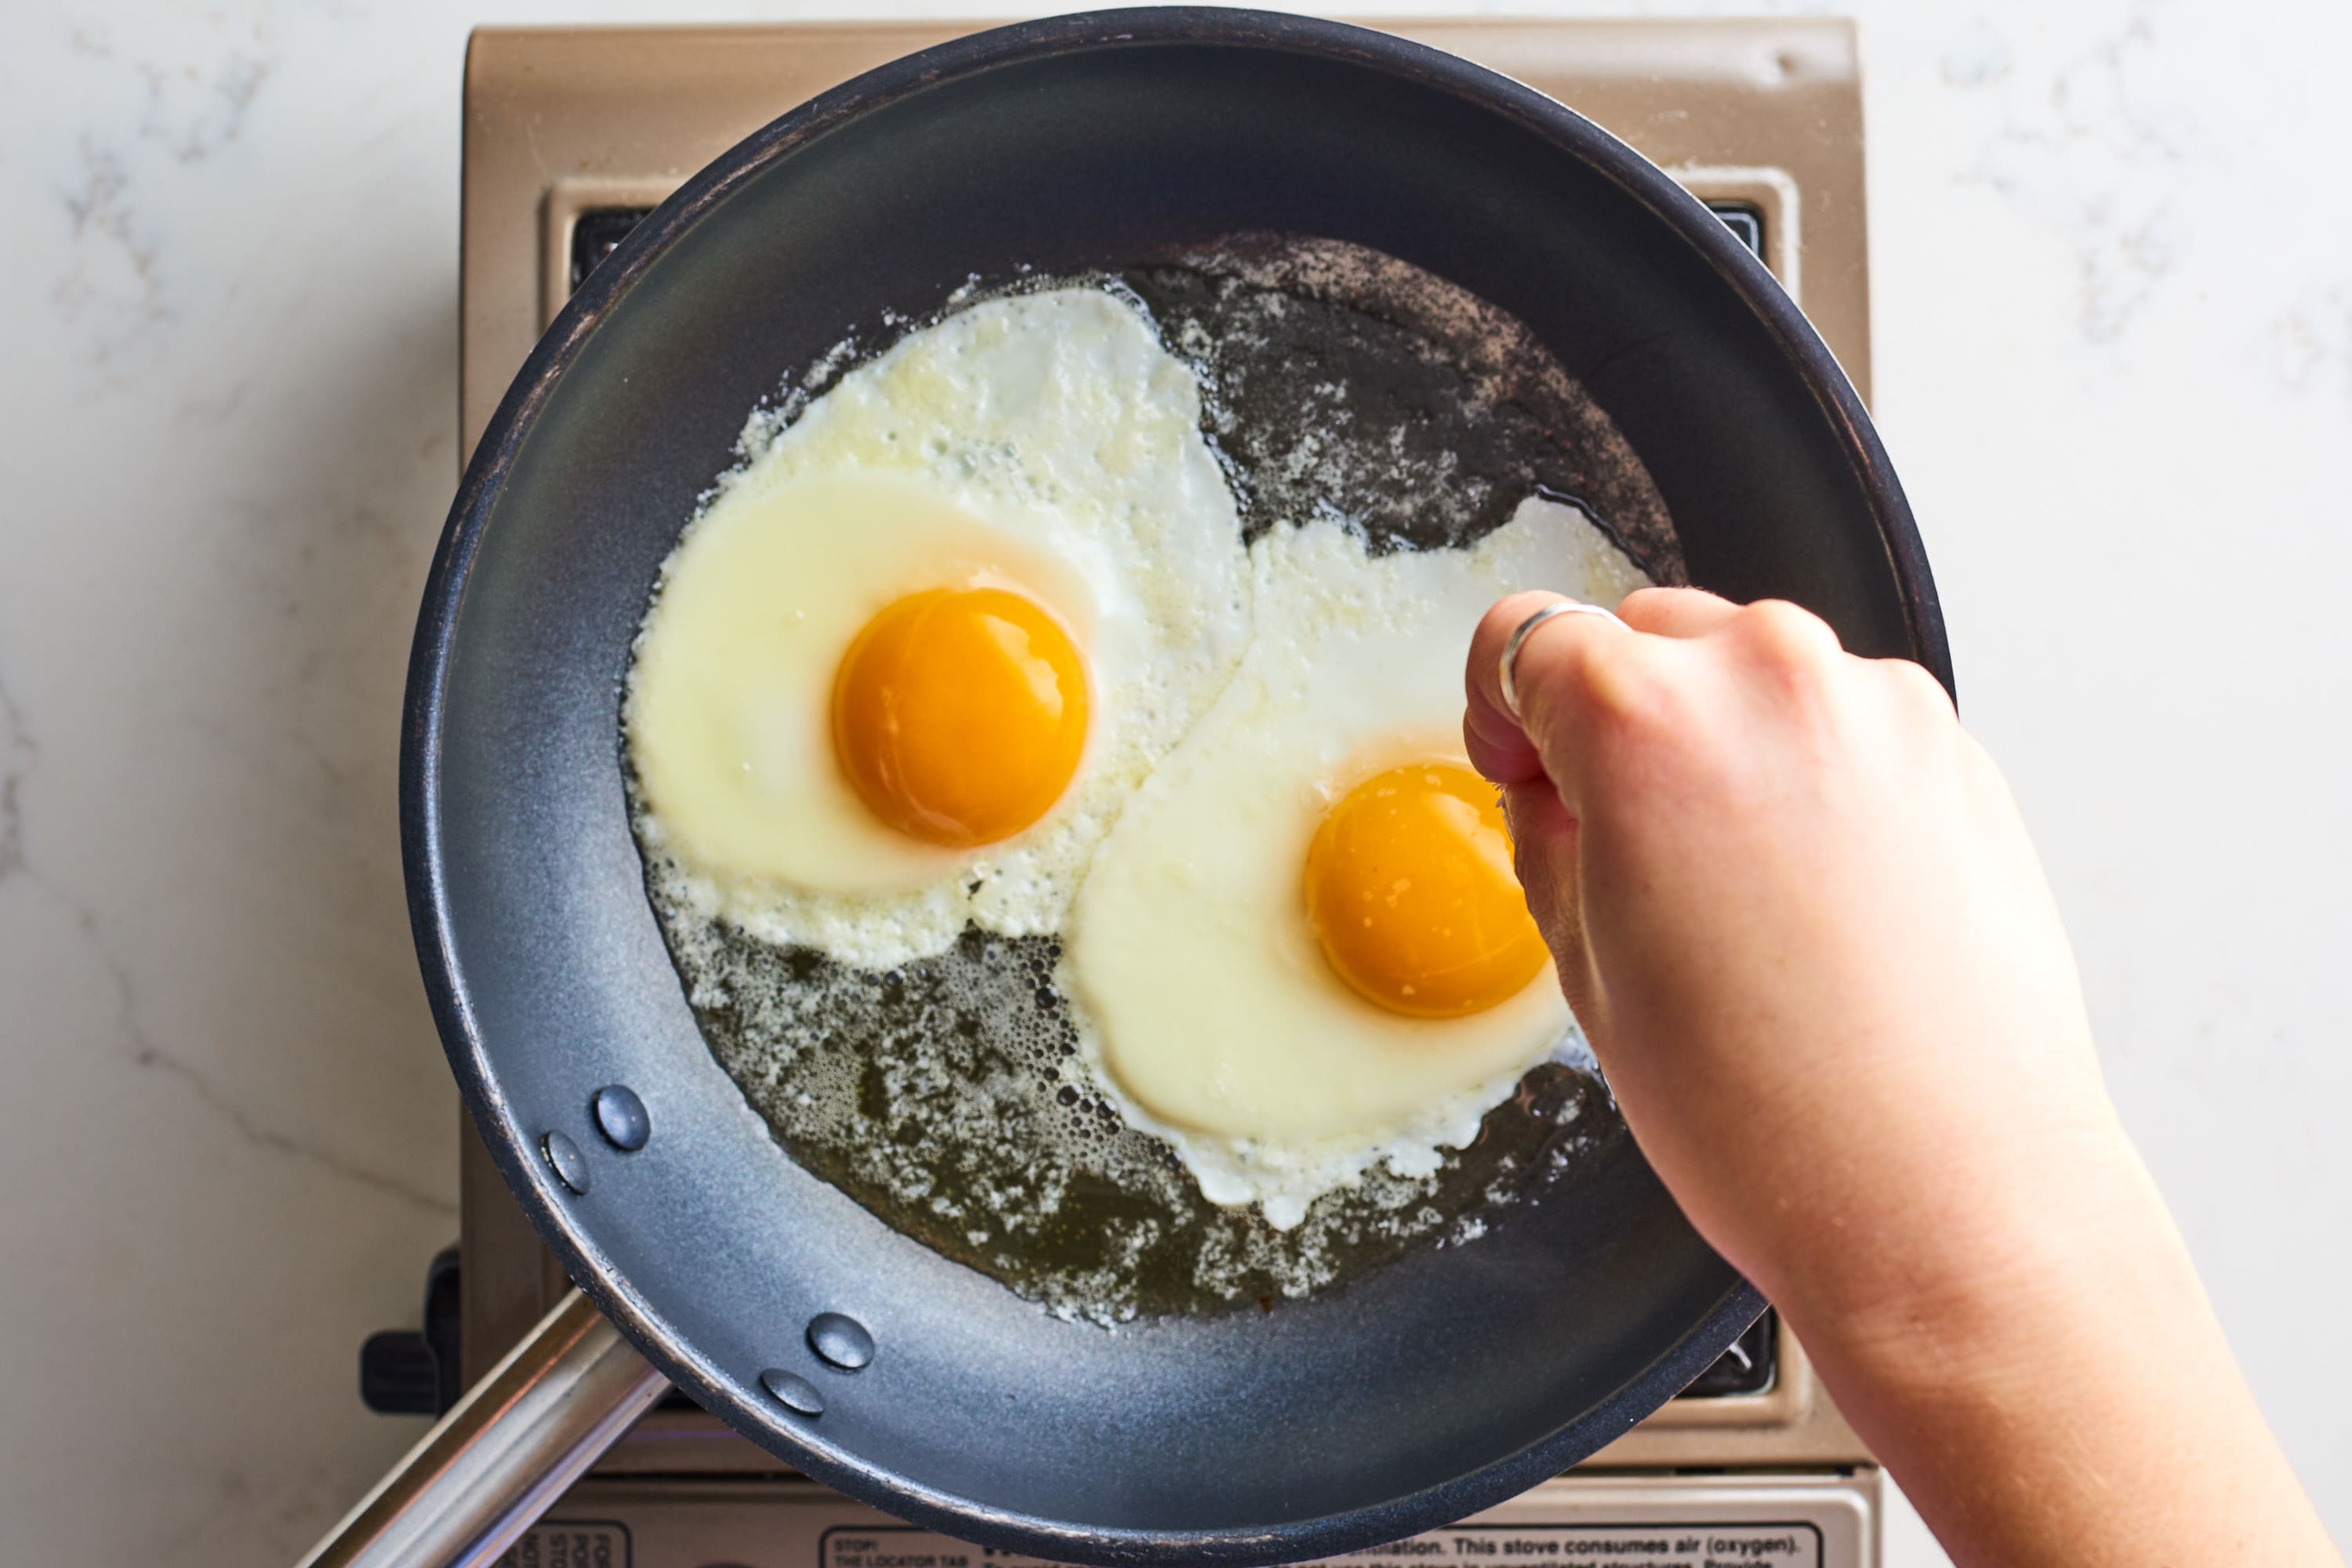 https://cdn.apartmenttherapy.info/image/upload/v1577132641/k/Photo/Recipes/2020-01-How-to-Make-a-Perfect-Over-Easy-Egg/How-to-Make-a-Perfect-Over-Easy-Egg_020.jpg